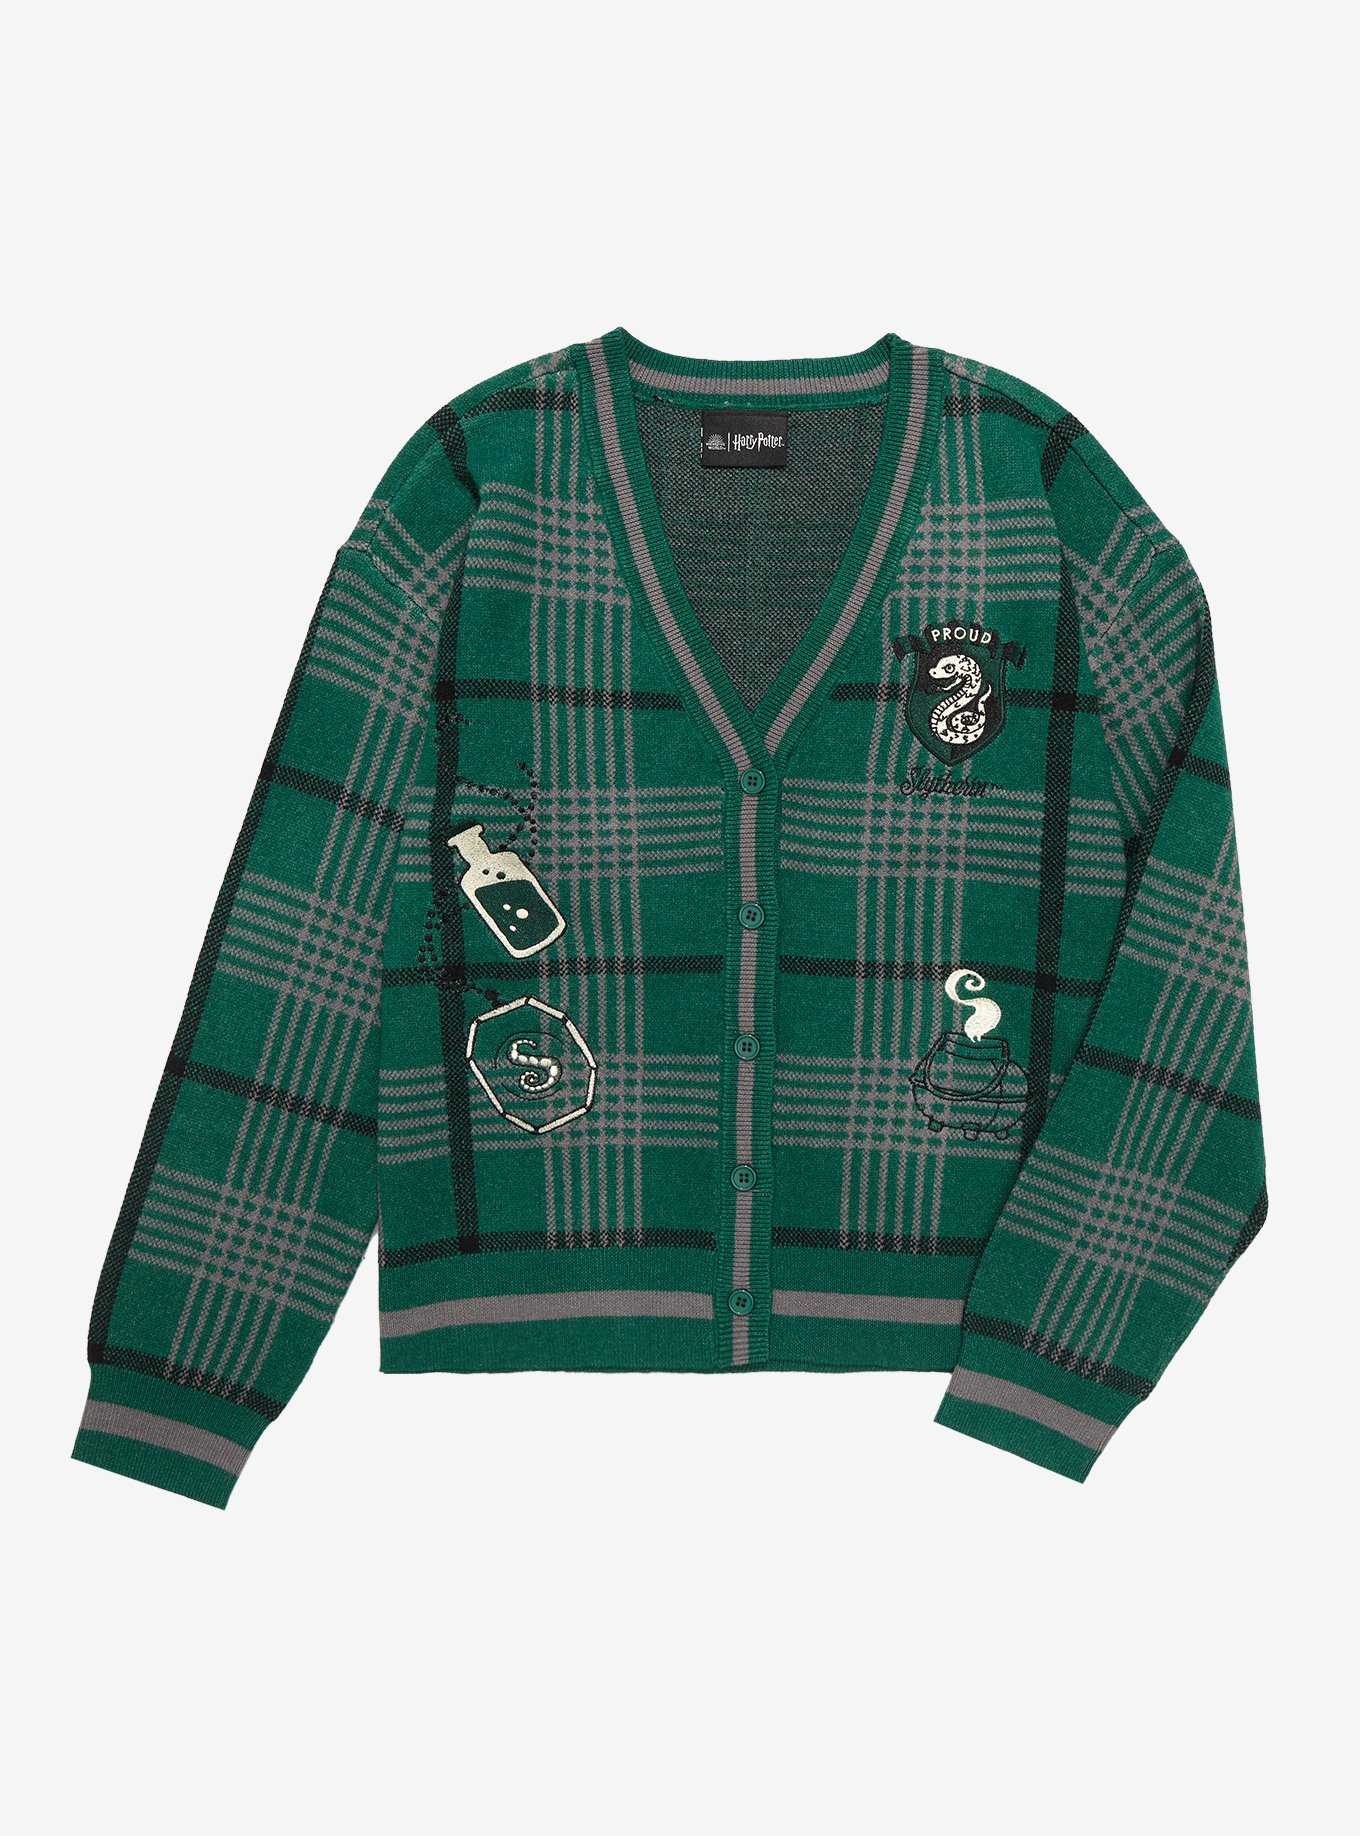 Harry Potter Slytherin Women's Cardigan - BoxLunch Exclusive, , hi-res